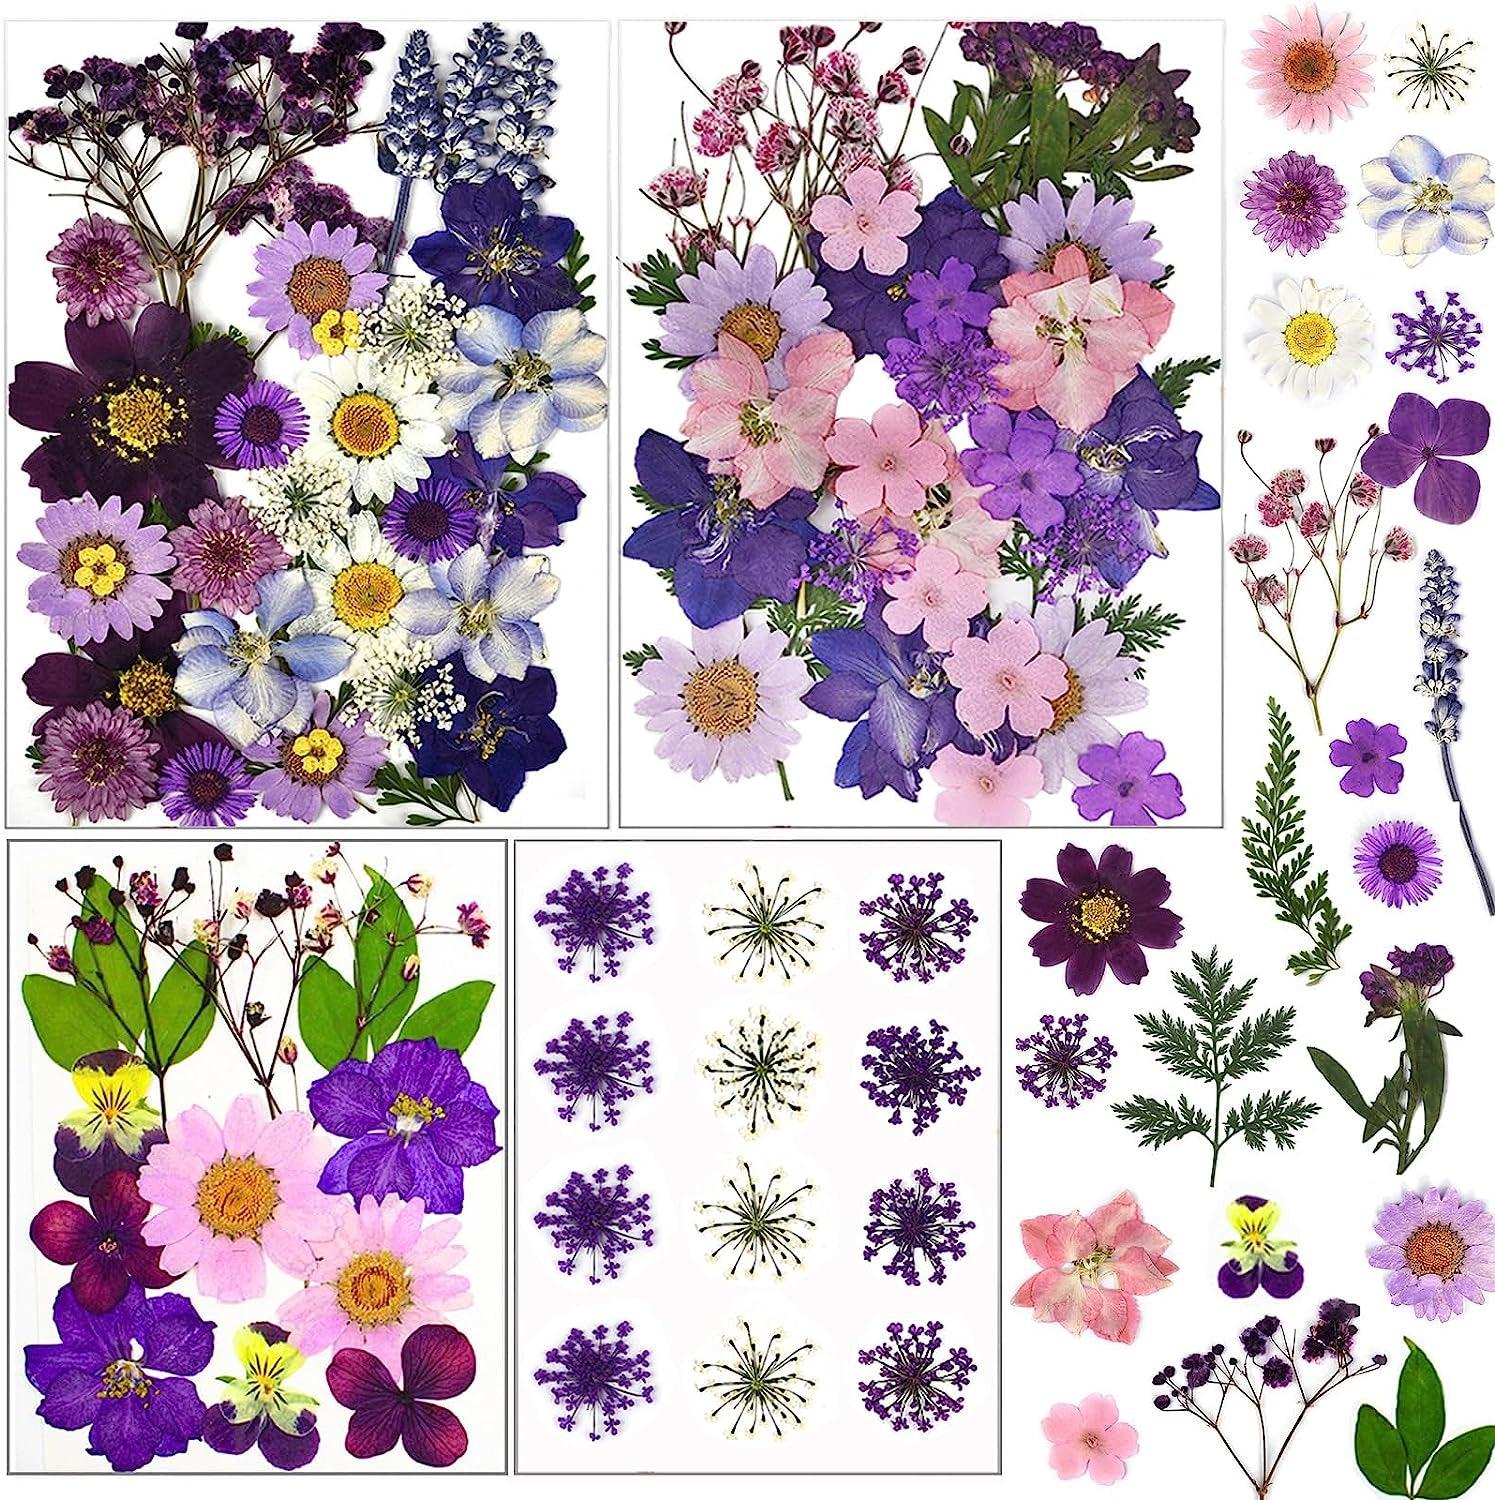 Dried Pressed Flowers For Crafts - Pressed Flowers Mix Pack - Dry